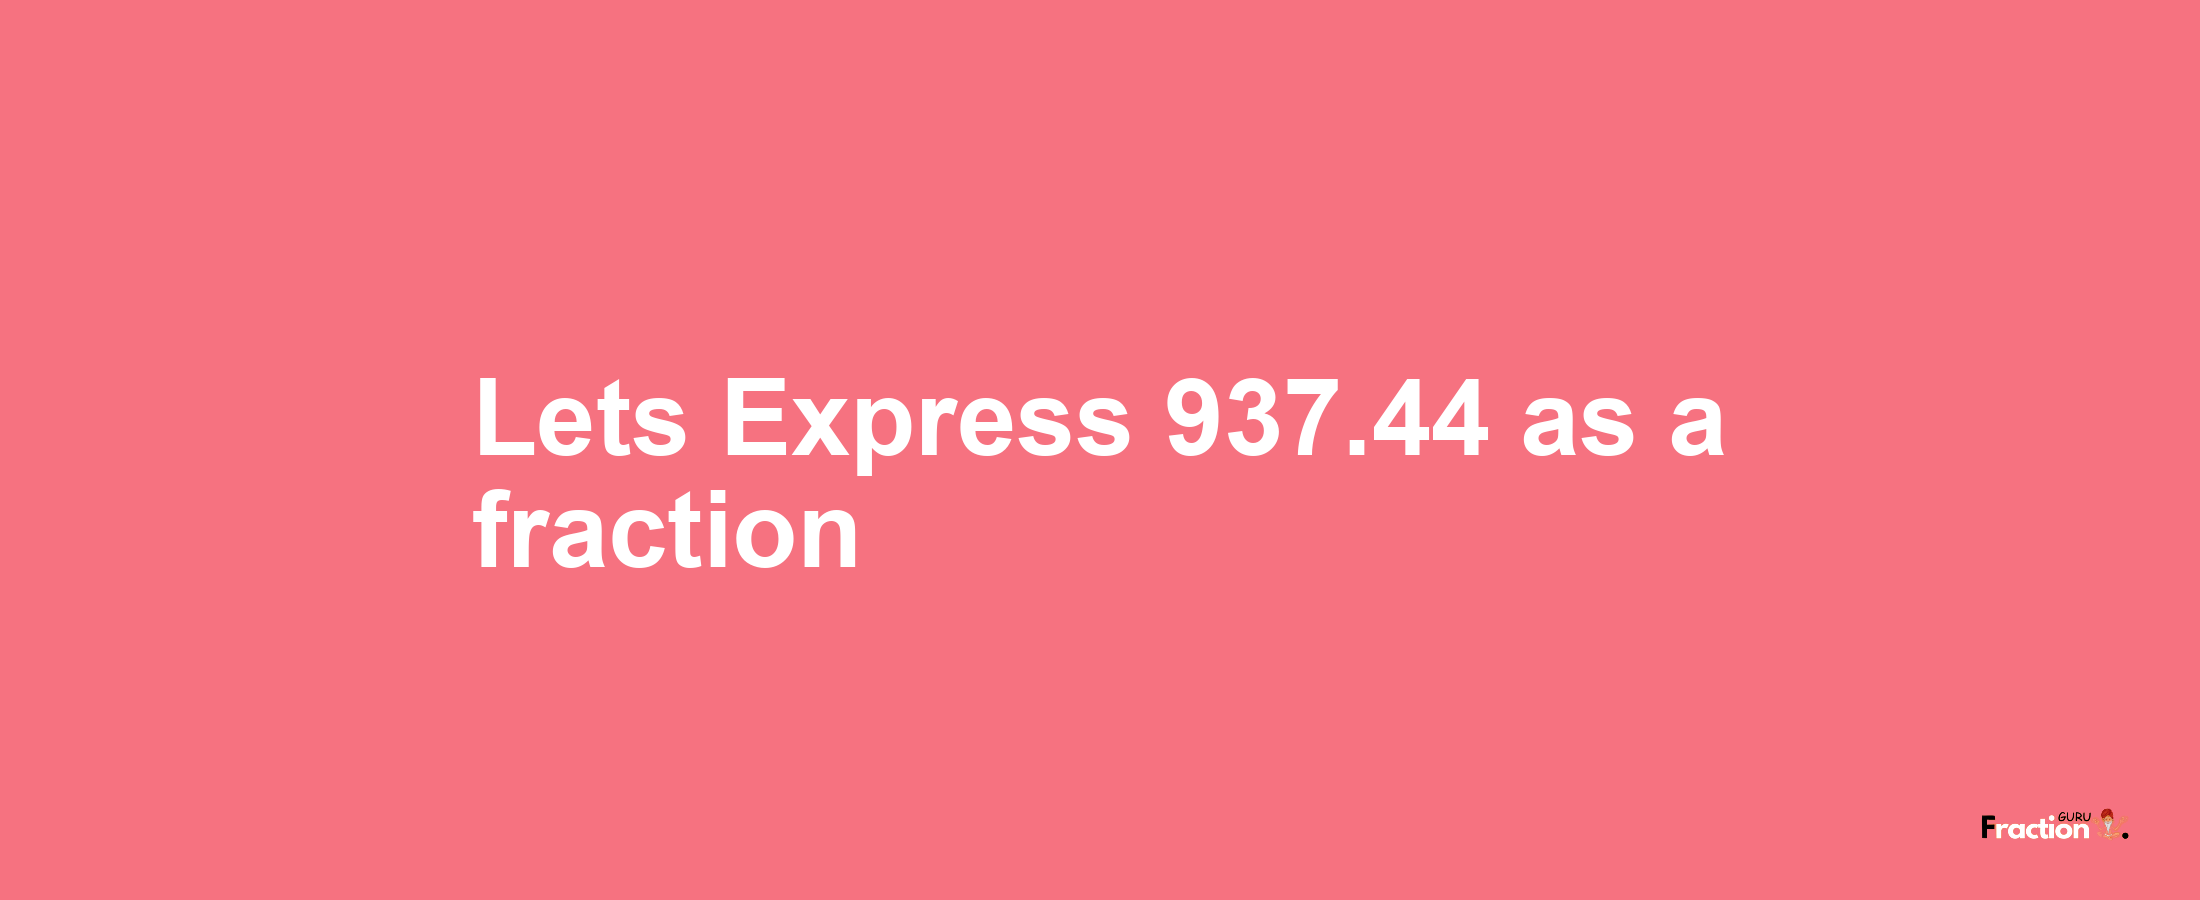 Lets Express 937.44 as afraction